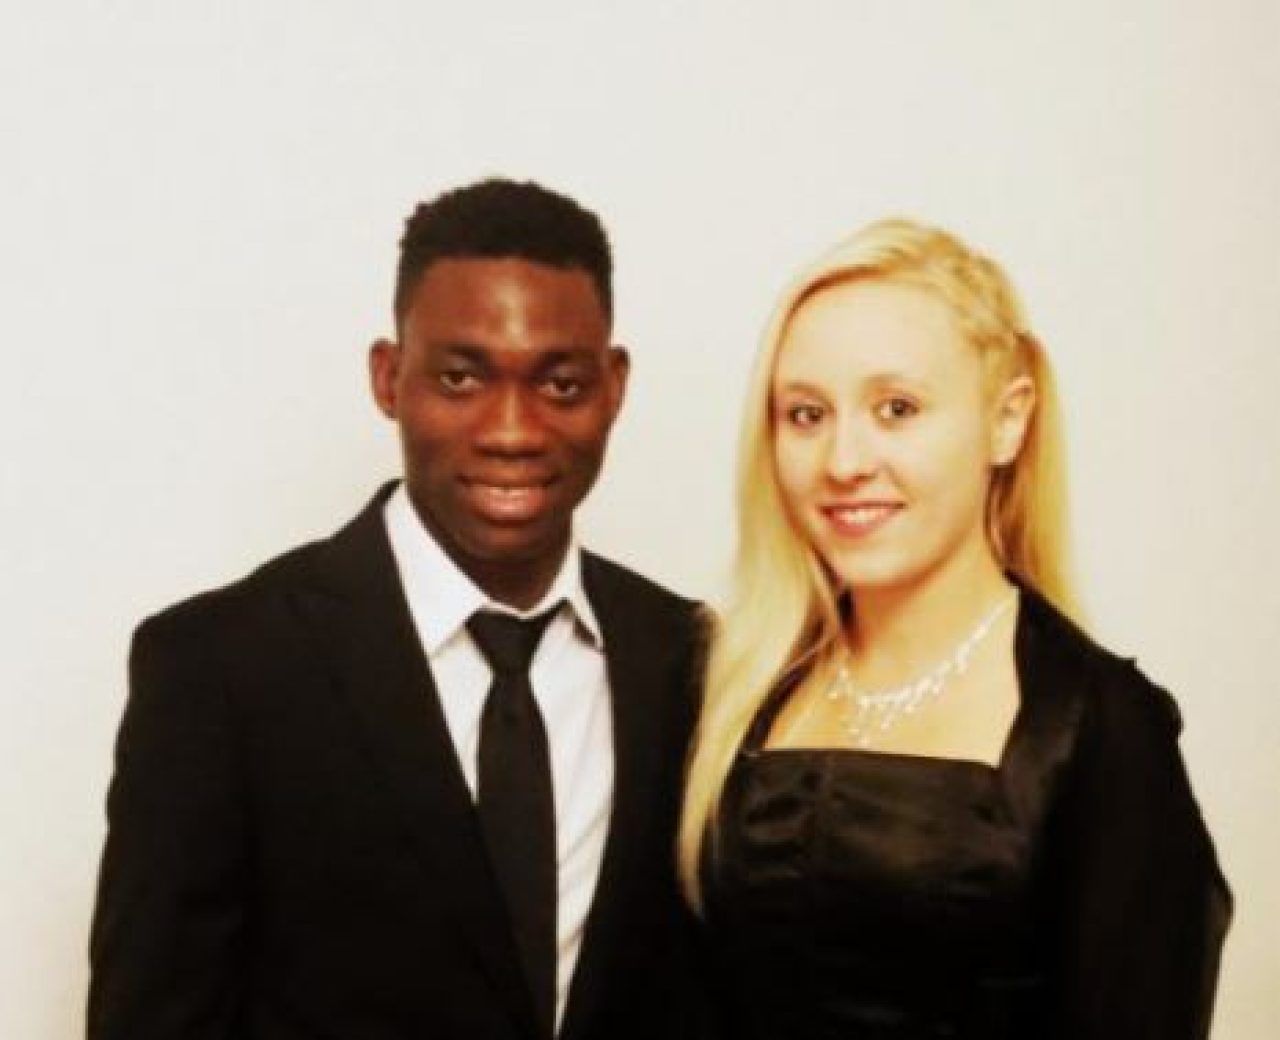 According to reports, Christian Atsu was battling divorce before his death. AdvertAfrica News on afronewswire.com: Amplifying Africa's Voice | afronewswire.com | Breaking News & Stories